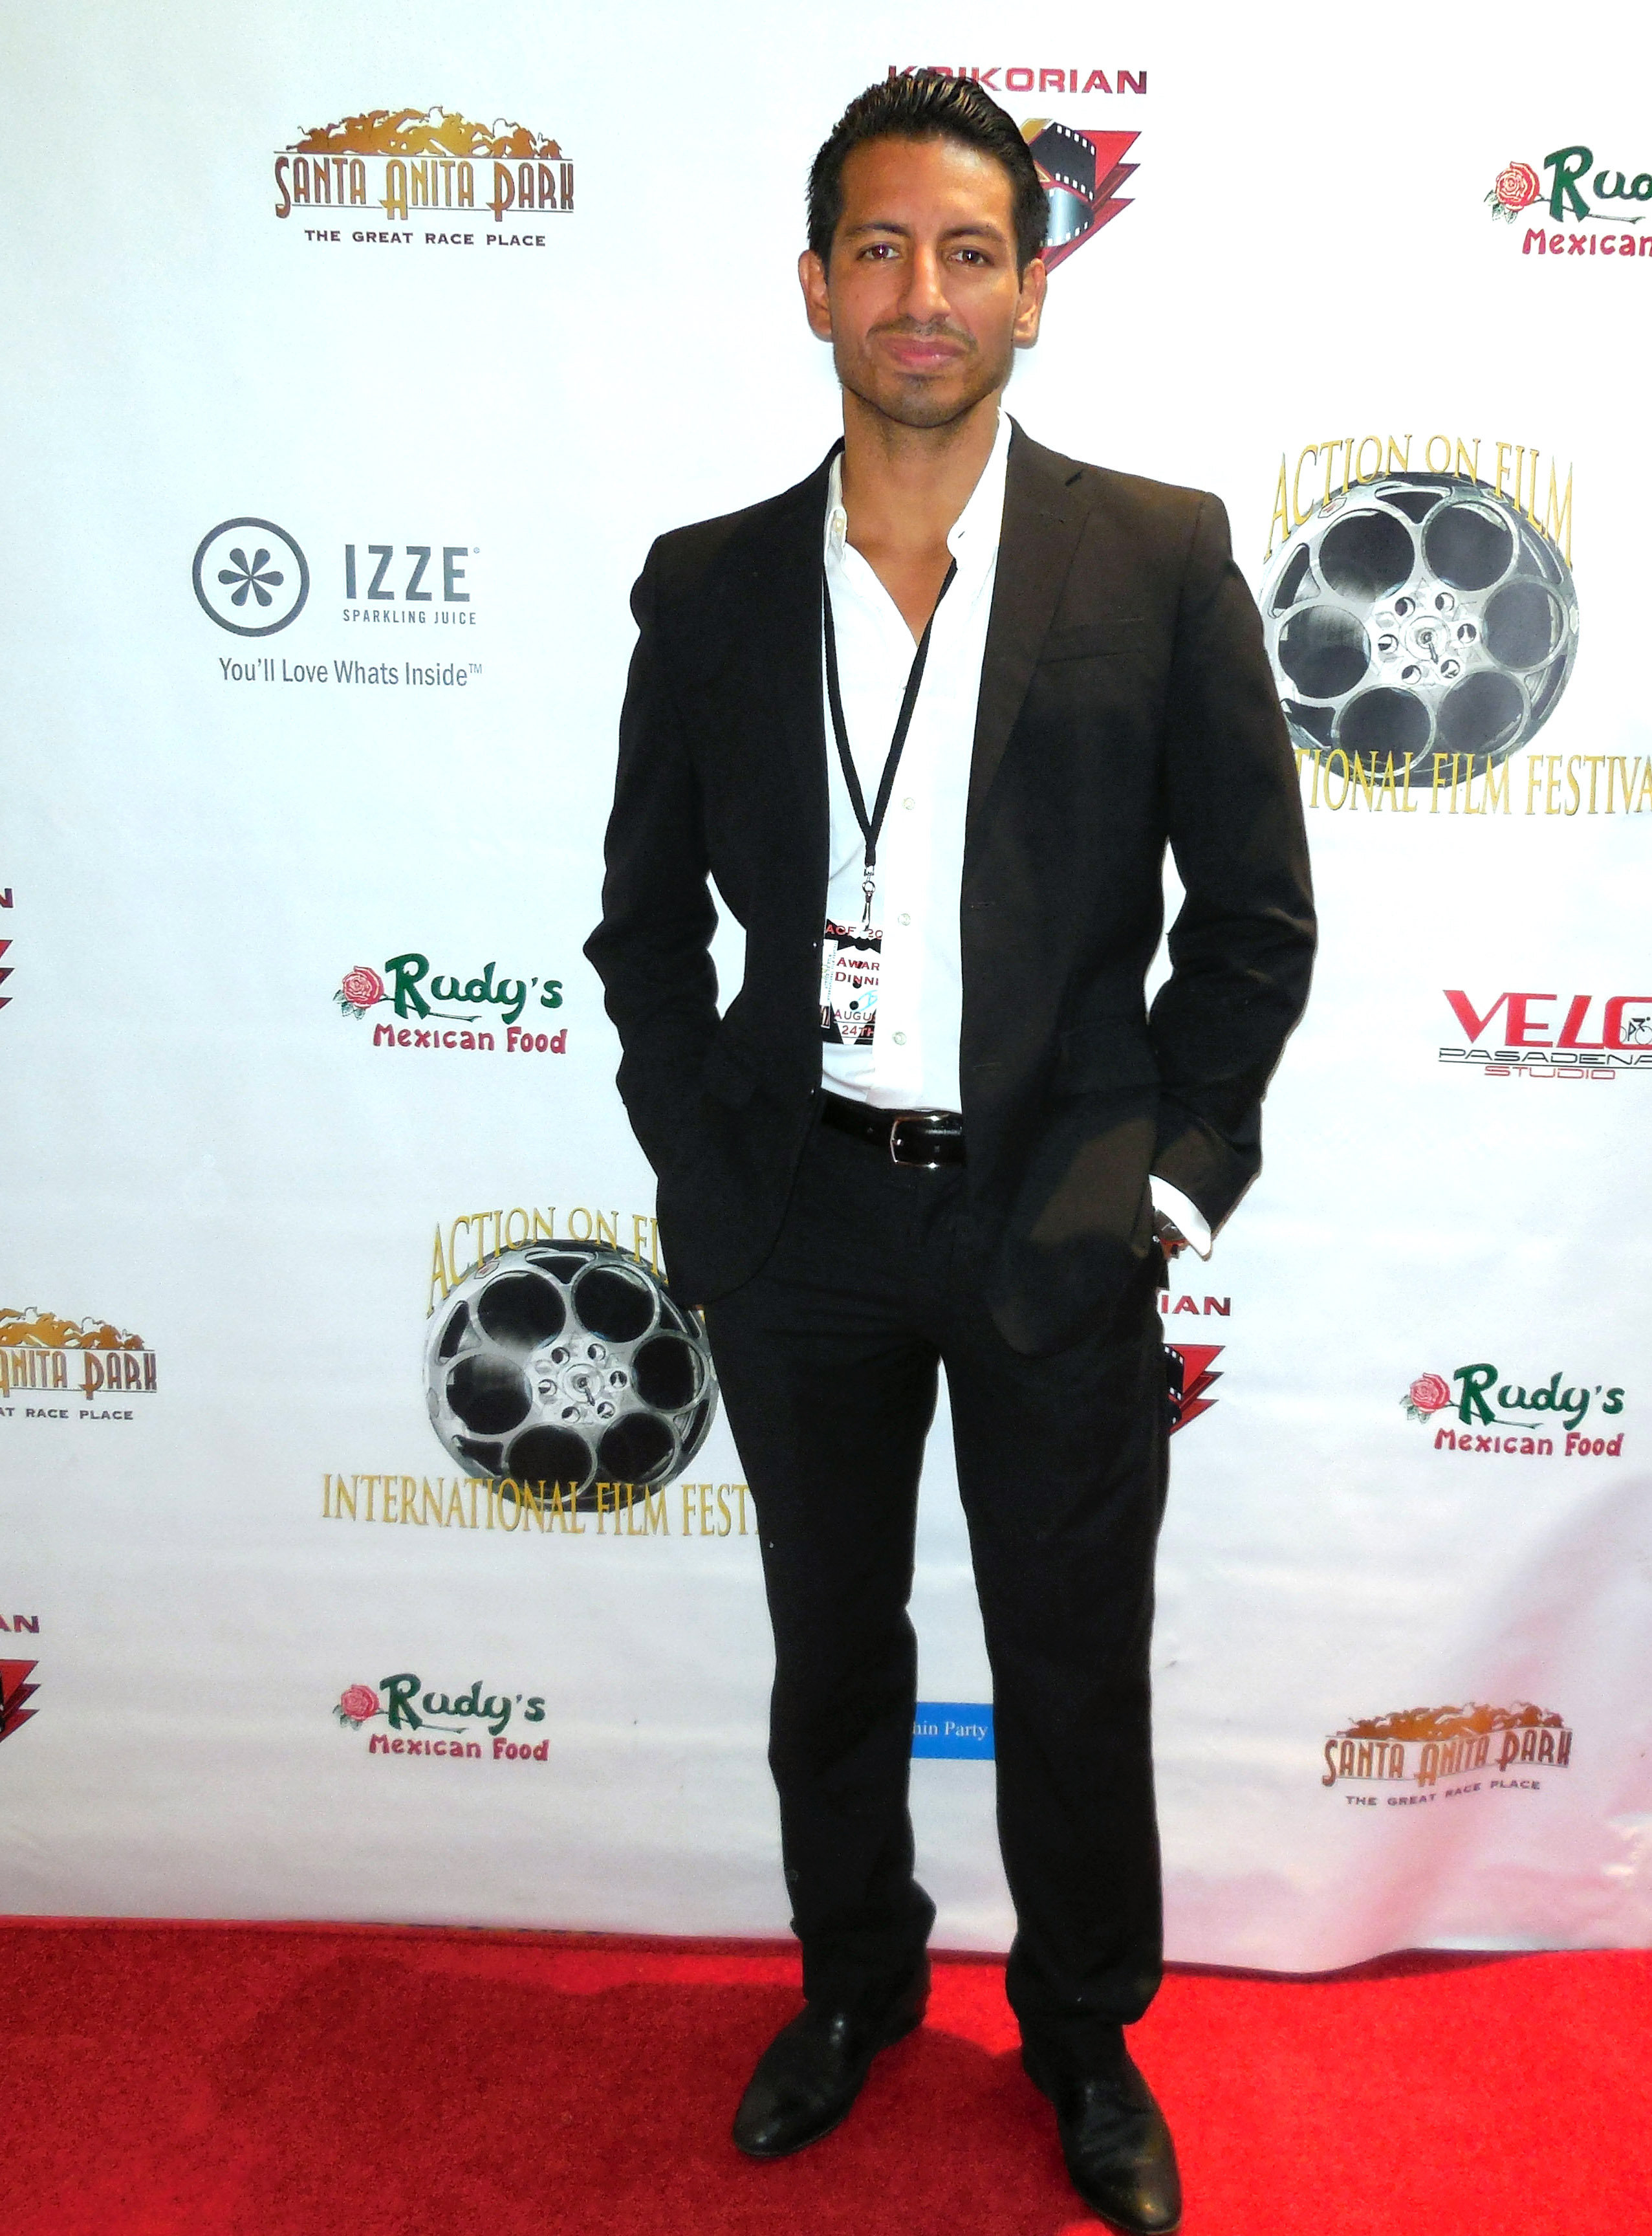 Alex Kruz at the Action on Film Festival (2013) Winner of the Xristos Award presented by Sony, Stella Adler LA, AOF, and Xristos Prod for Acting and Story Content.